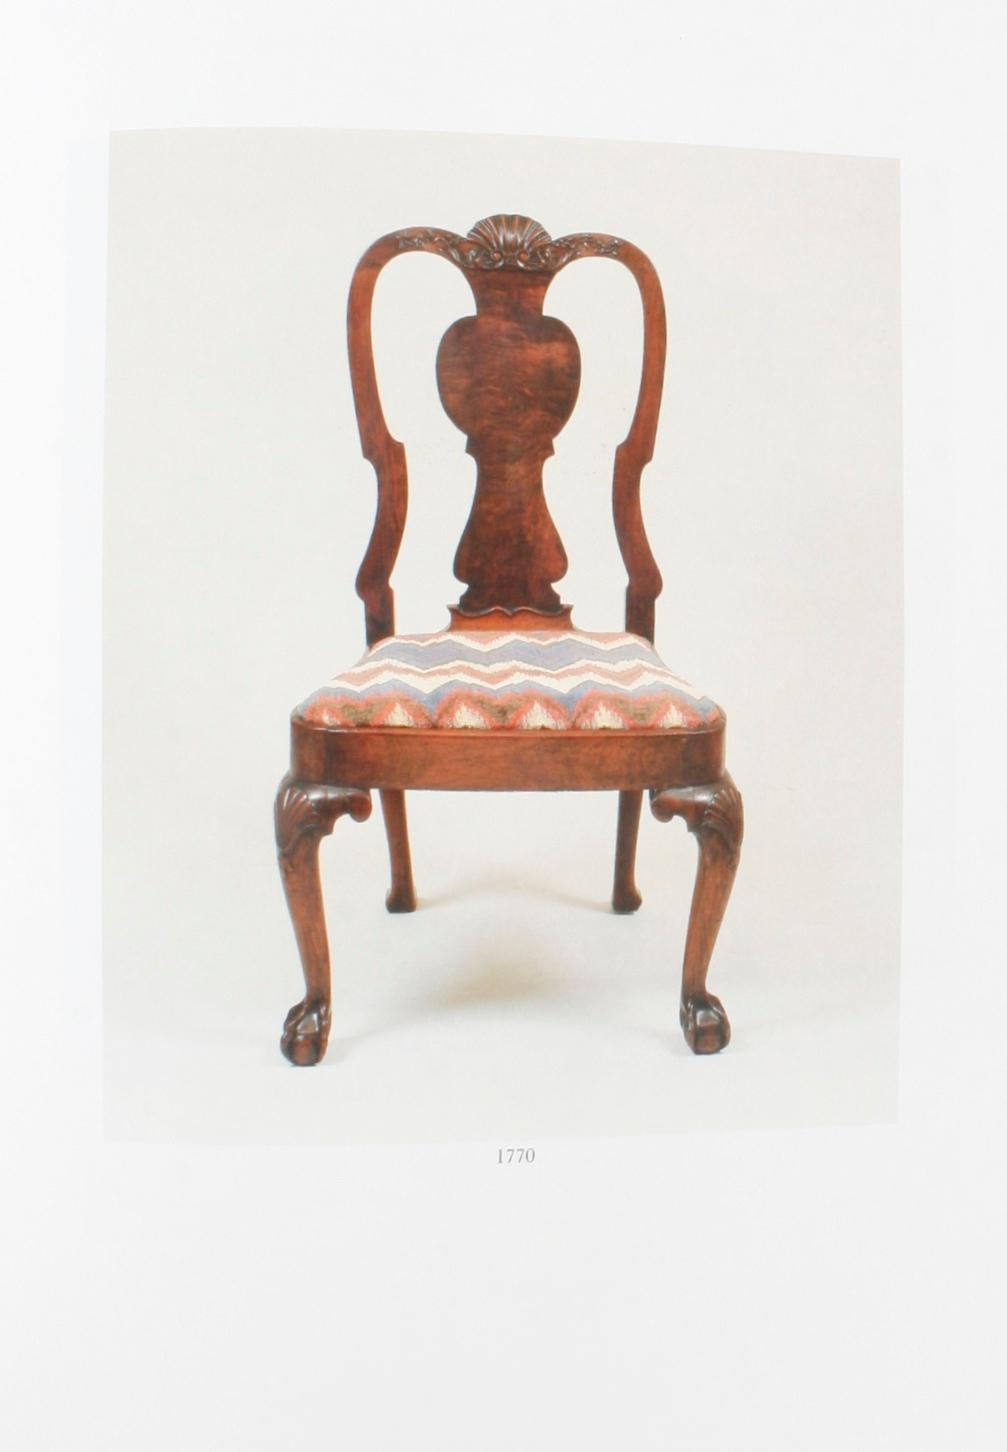 20th Century Sotheby's, Important American Furniture of Doris and Richard M. Seidlitz For Sale